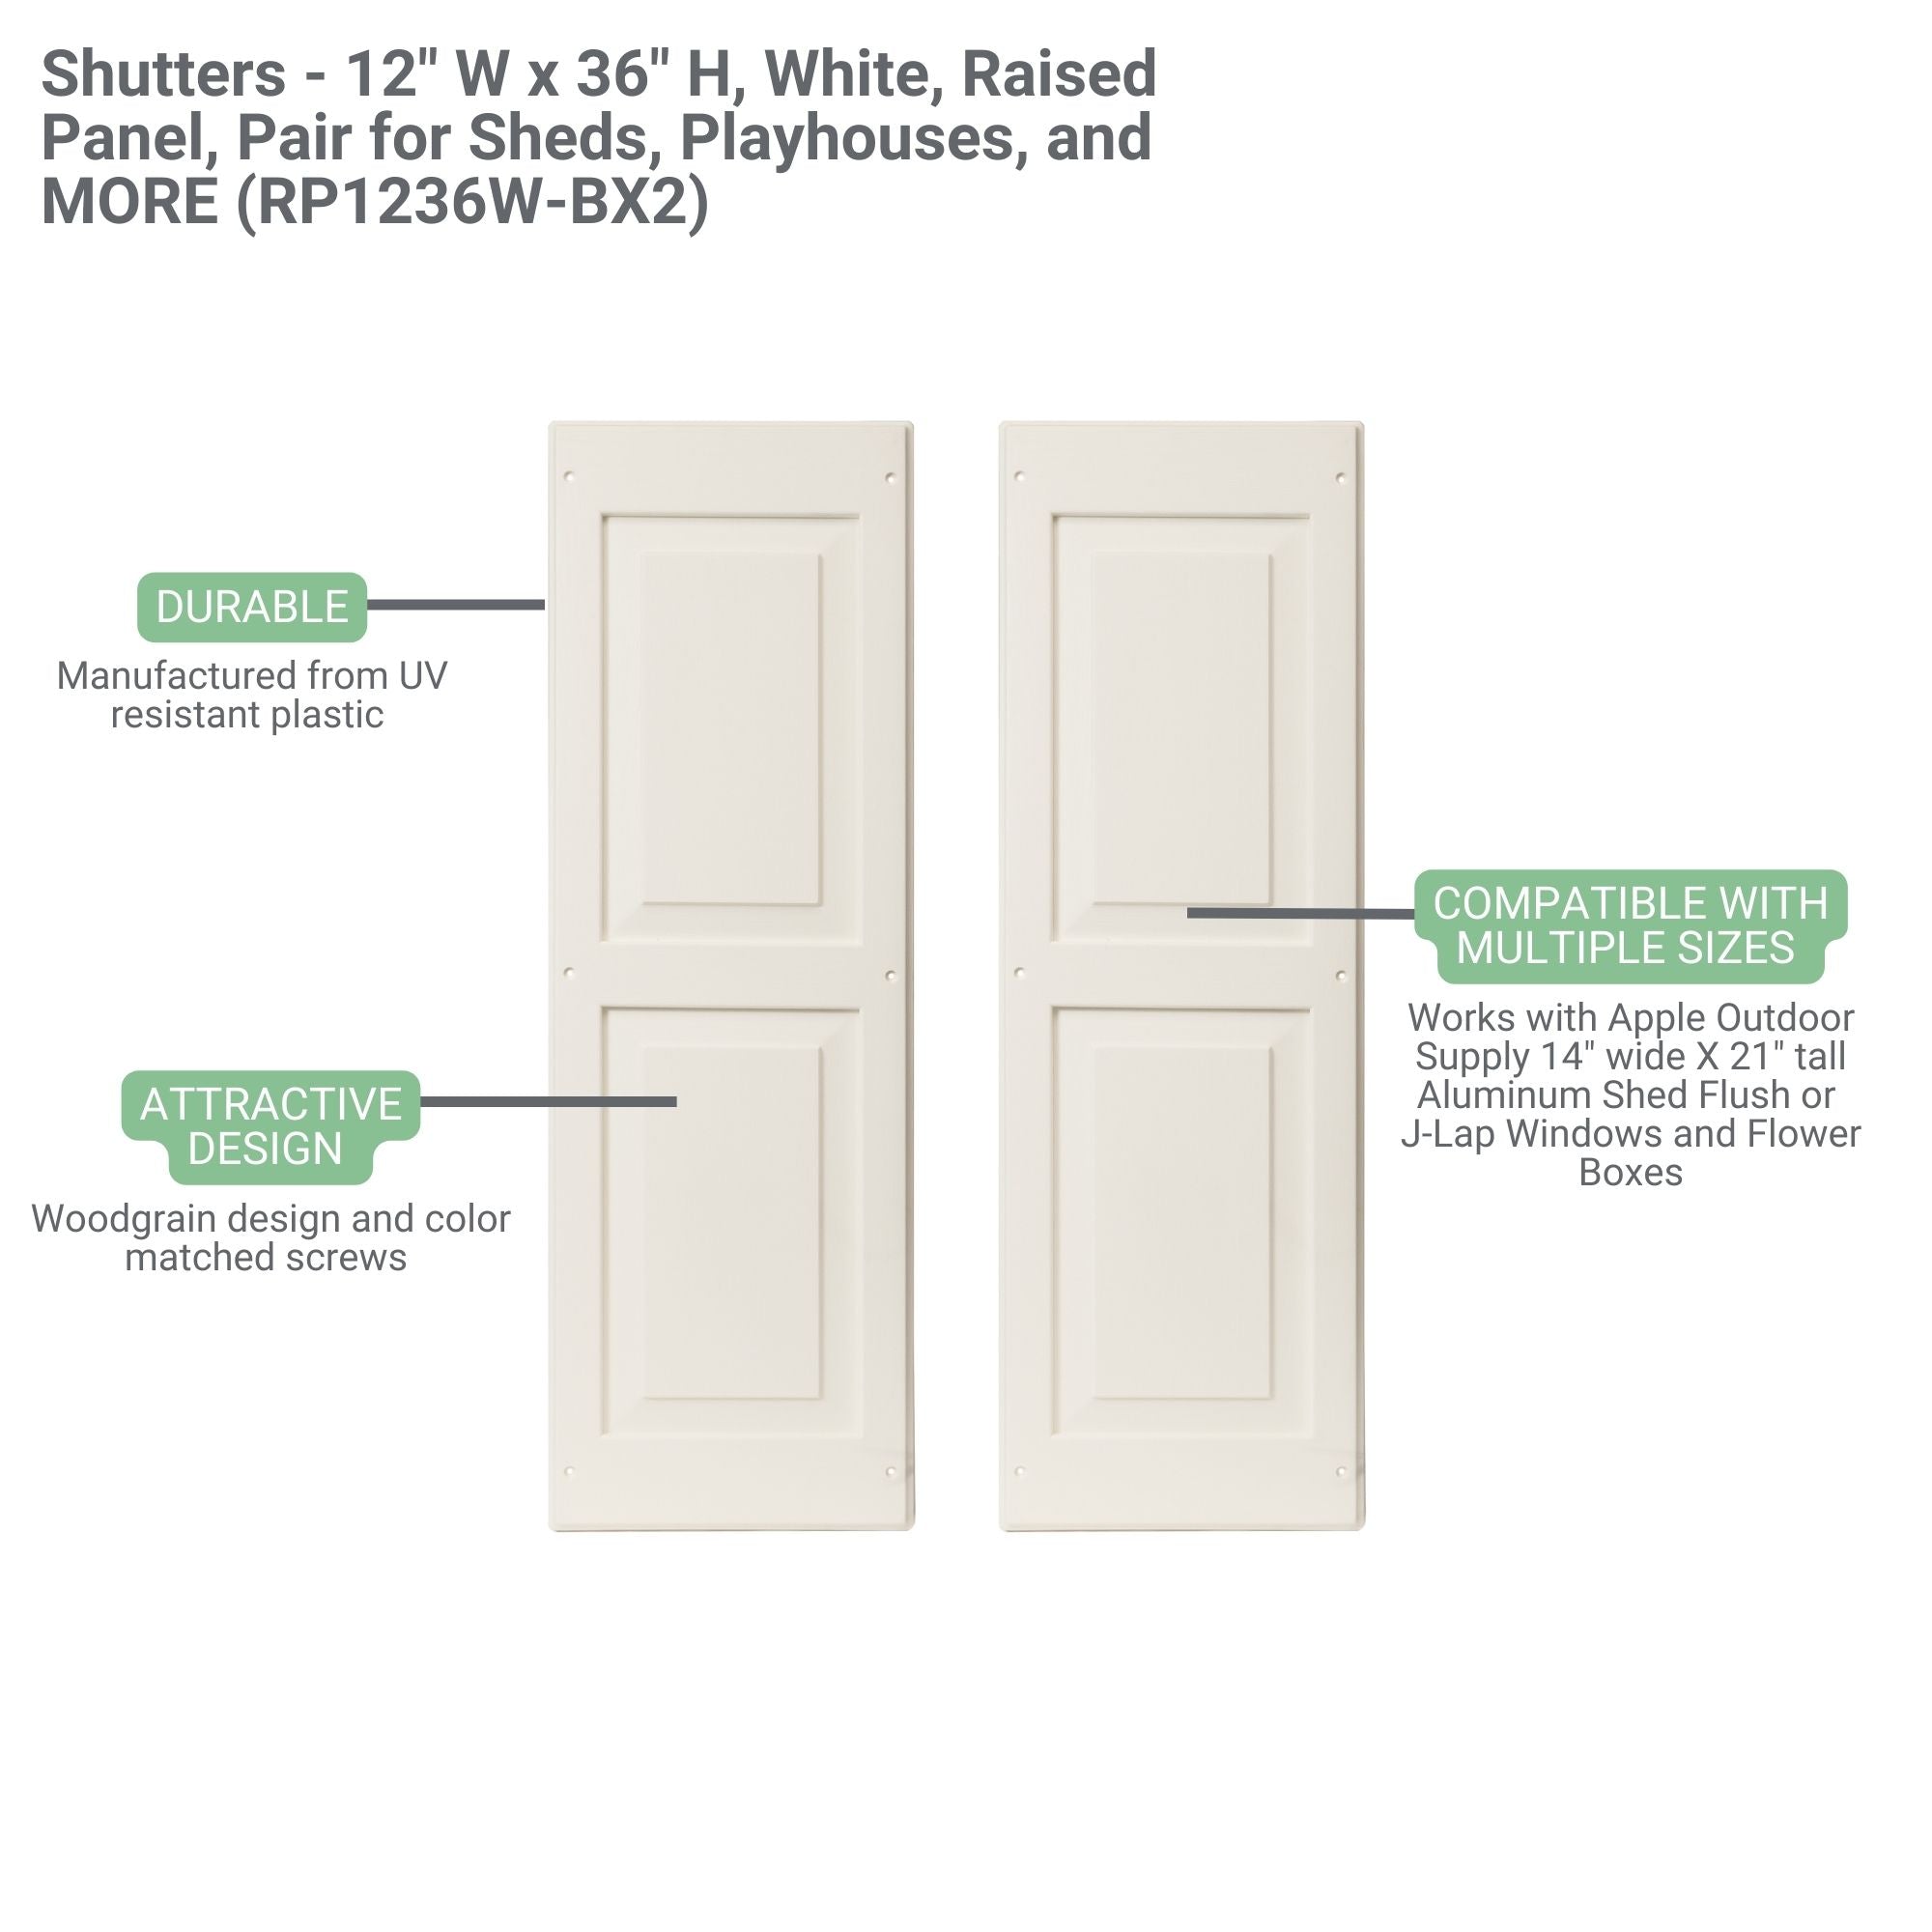 Shutters - 12" W x 36" H Raised Panel Shutters, Paintable 1 Pair